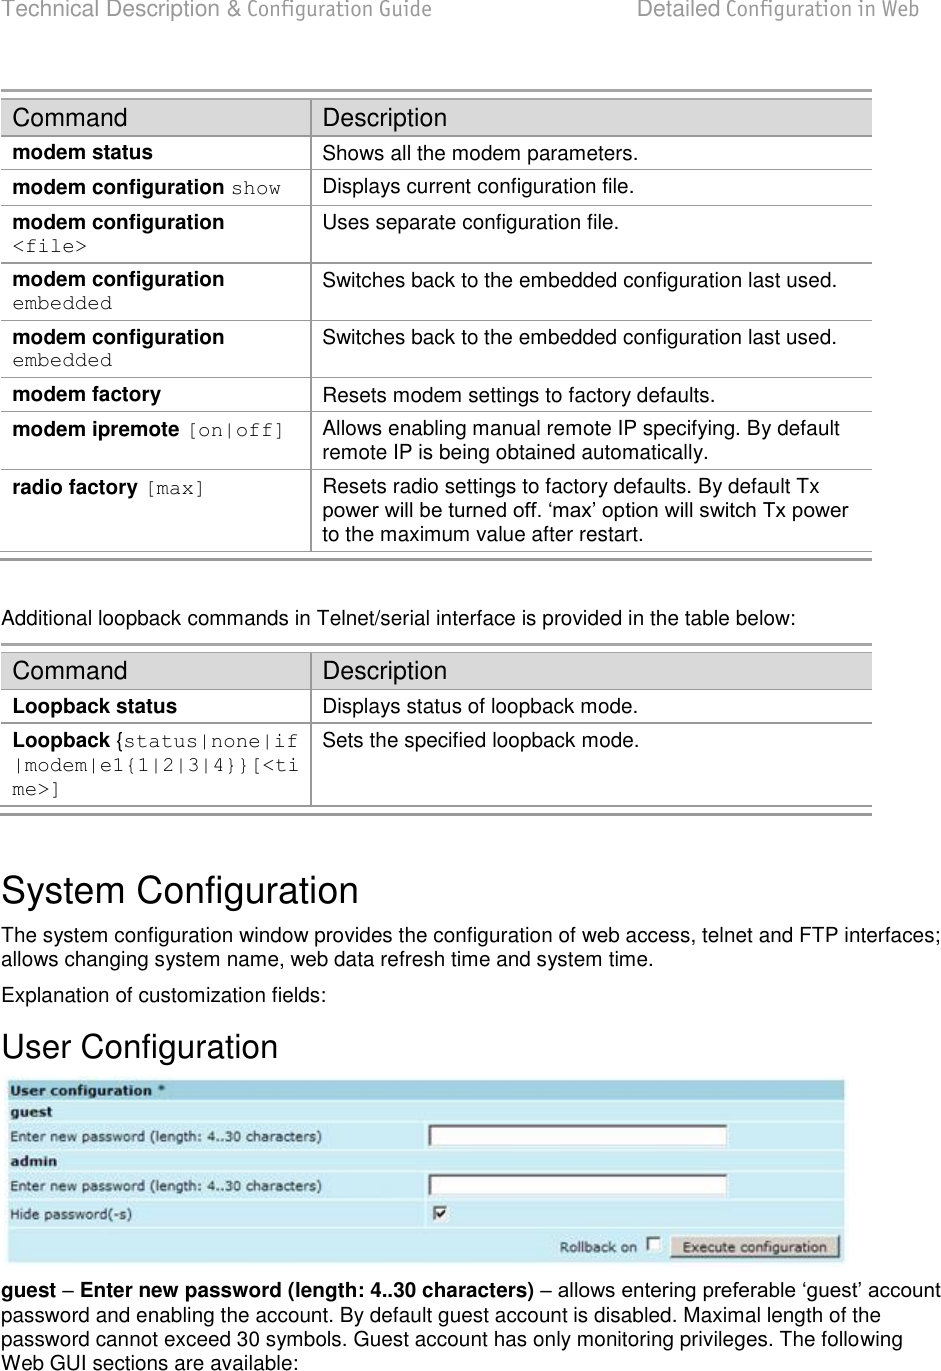 Technical Description &amp; Configuration Guide  Detailed Configuration in Web  LigoWave  Page 41 Command Description modem status Shows all the modem parameters. modem configuration show Displays current configuration file. modem configuration &lt;file&gt; Uses separate configuration file. modem configuration embedded Switches back to the embedded configuration last used. modem configuration embedded Switches back to the embedded configuration last used. modem factory Resets modem settings to factory defaults.  modem ipremote [on|off] Allows enabling manual remote IP specifying. By default remote IP is being obtained automatically. radio factory [max] Resets radio settings to factory defaults. By default Tx to the maximum value after restart.  Additional loopback commands in Telnet/serial interface is provided in the table below: Command Description Loopback status Displays status of loopback mode.  Loopback {status|none|if |modem|e1{1|2|3|4}}[&lt;time&gt;] Sets the specified loopback mode.  System Configuration The system configuration window provides the configuration of web access, telnet and FTP interfaces; allows changing system name, web data refresh time and system time.  Explanation of customization fields: User Configuration  guest  Enter new password (length: 4..30 characters)  password and enabling the account. By default guest account is disabled. Maximal length of the password cannot exceed 30 symbols. Guest account has only monitoring privileges. The following Web GUI sections are available: 